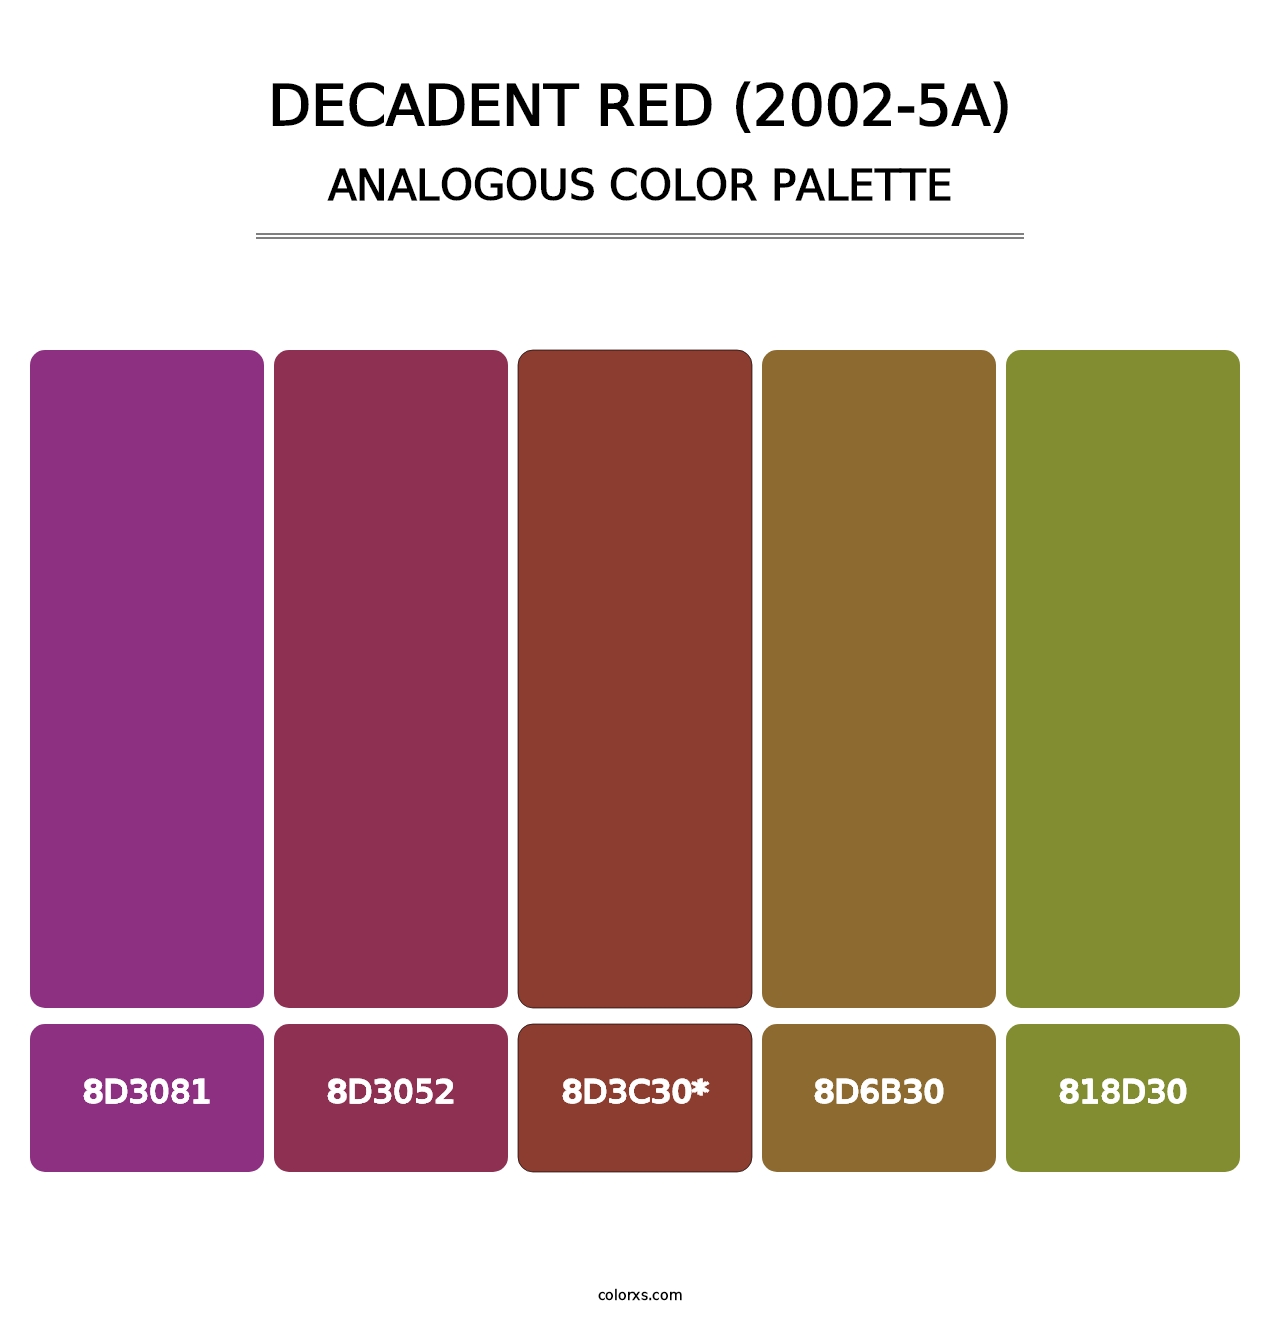 Decadent Red (2002-5A) - Analogous Color Palette